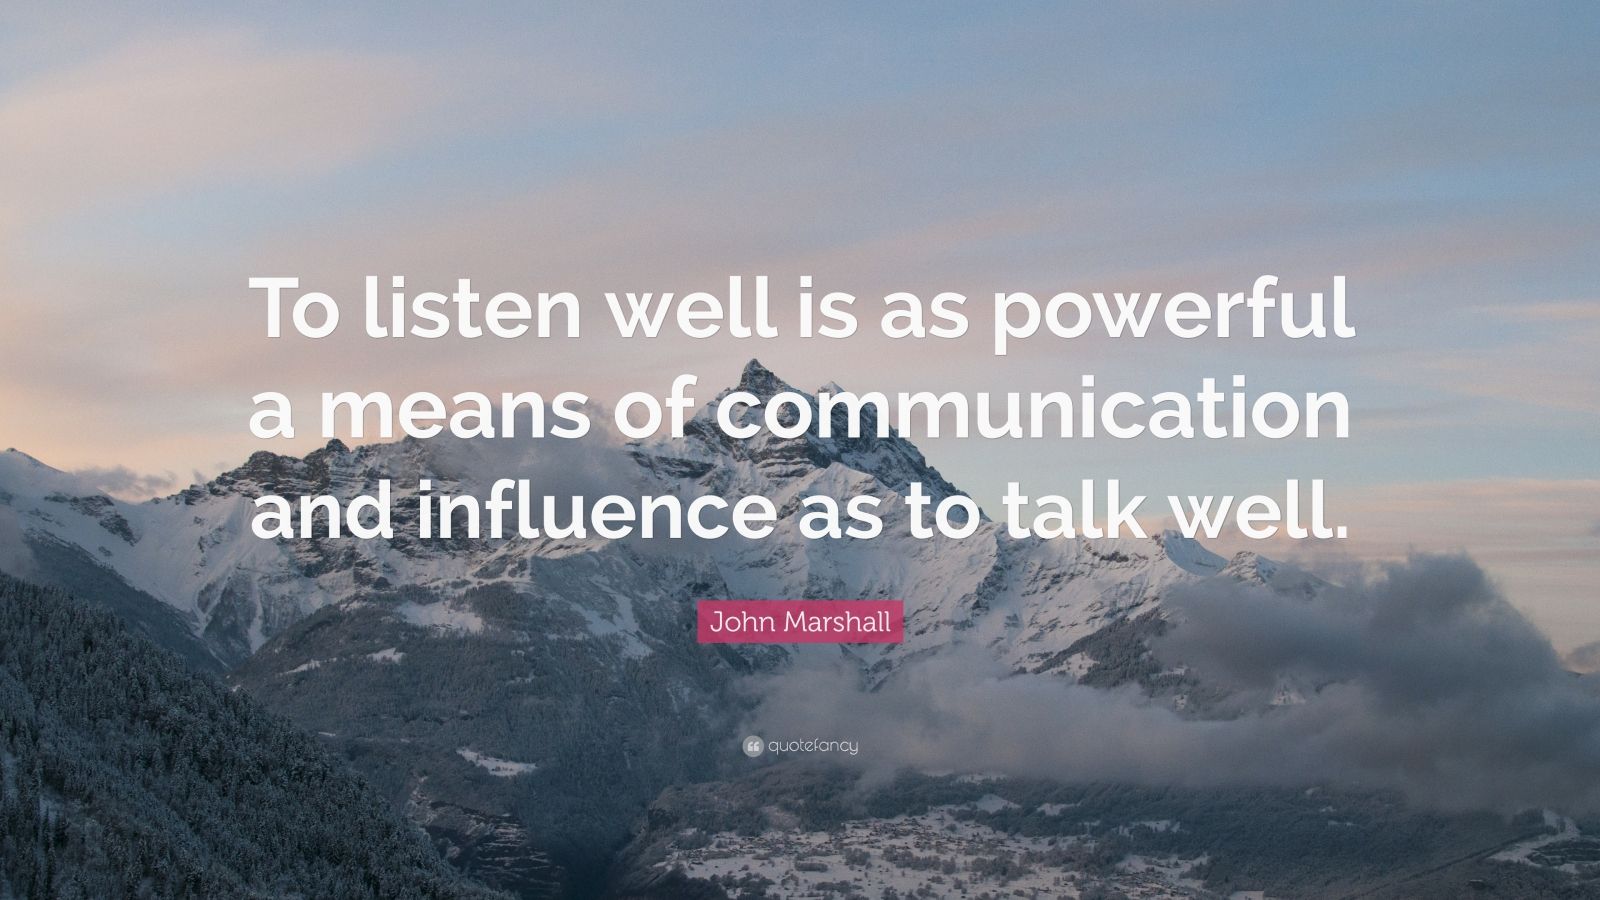 John Marshall Quote: "To listen well is as powerful a means of communication and influence as to ...